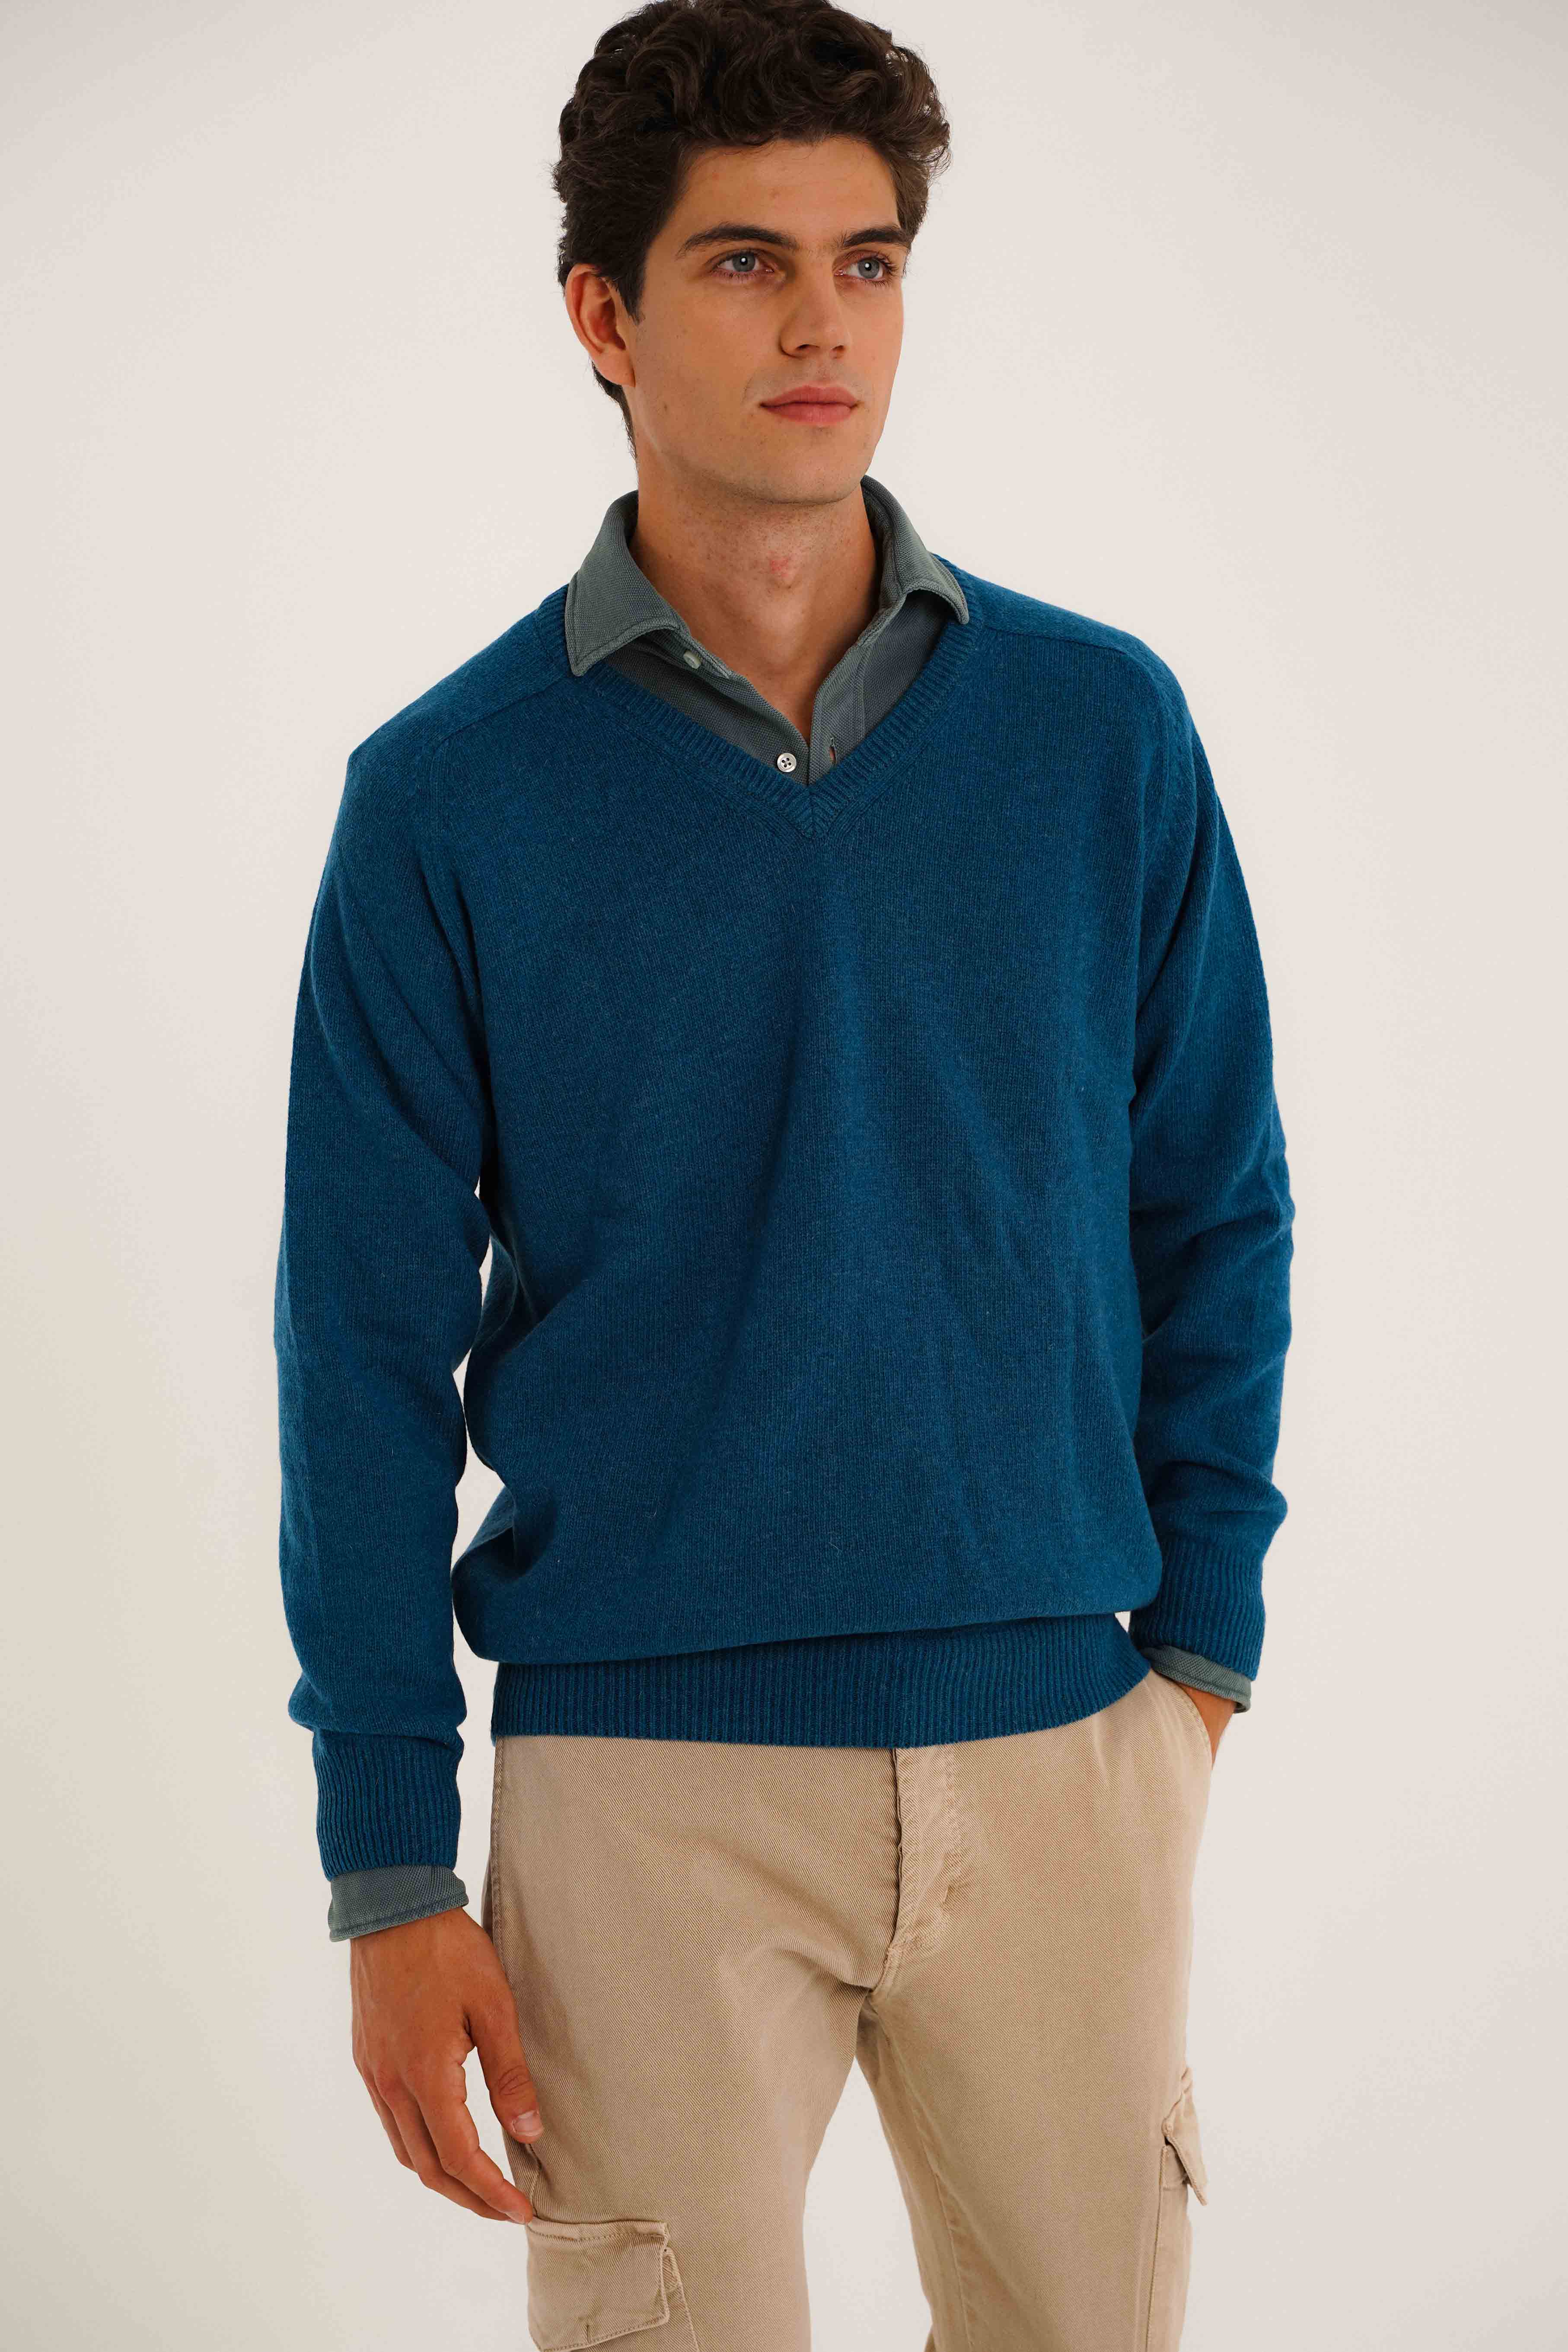 Jersey Cuello Pico Lambswool - Azul Pacífico